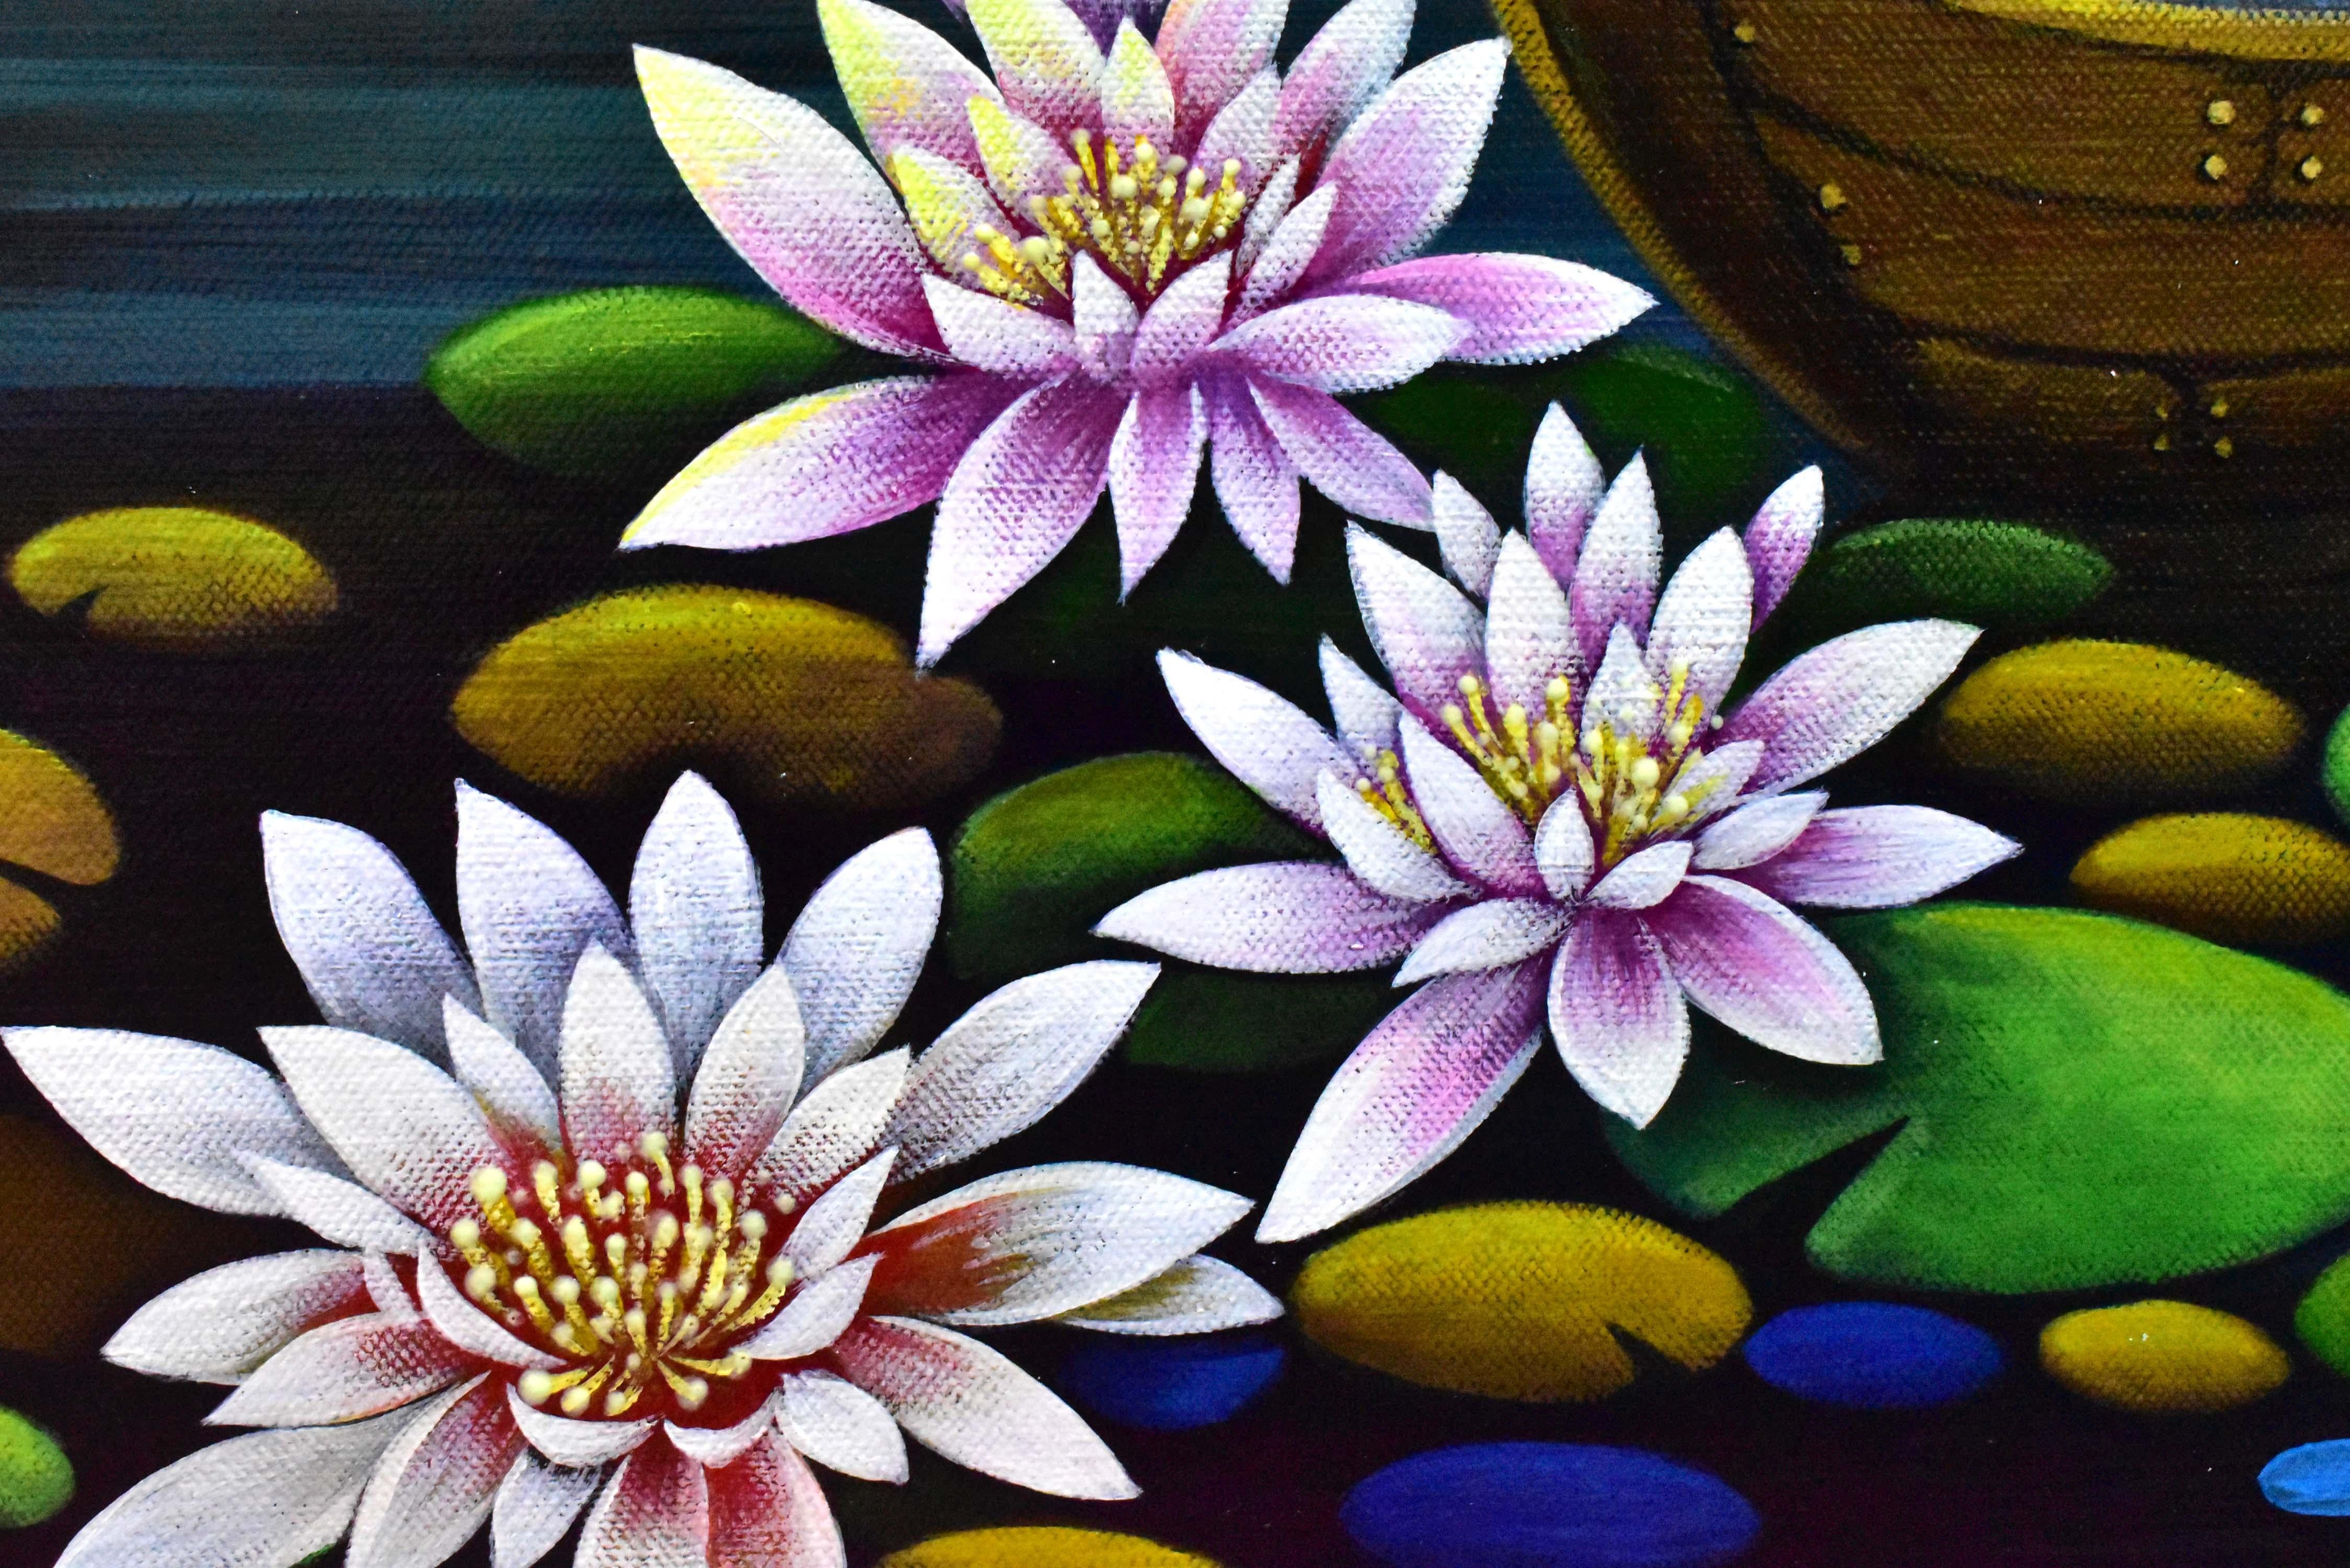 Artist statement
A brilliantly vibrant life;
Blooms like a strong-willed lotus;
Prevails like a determined lotus leaf.

About the artist
Chun-Yu emerges as a contemporary artist distinguished by numerous accolades garnered from diverse calligraphy